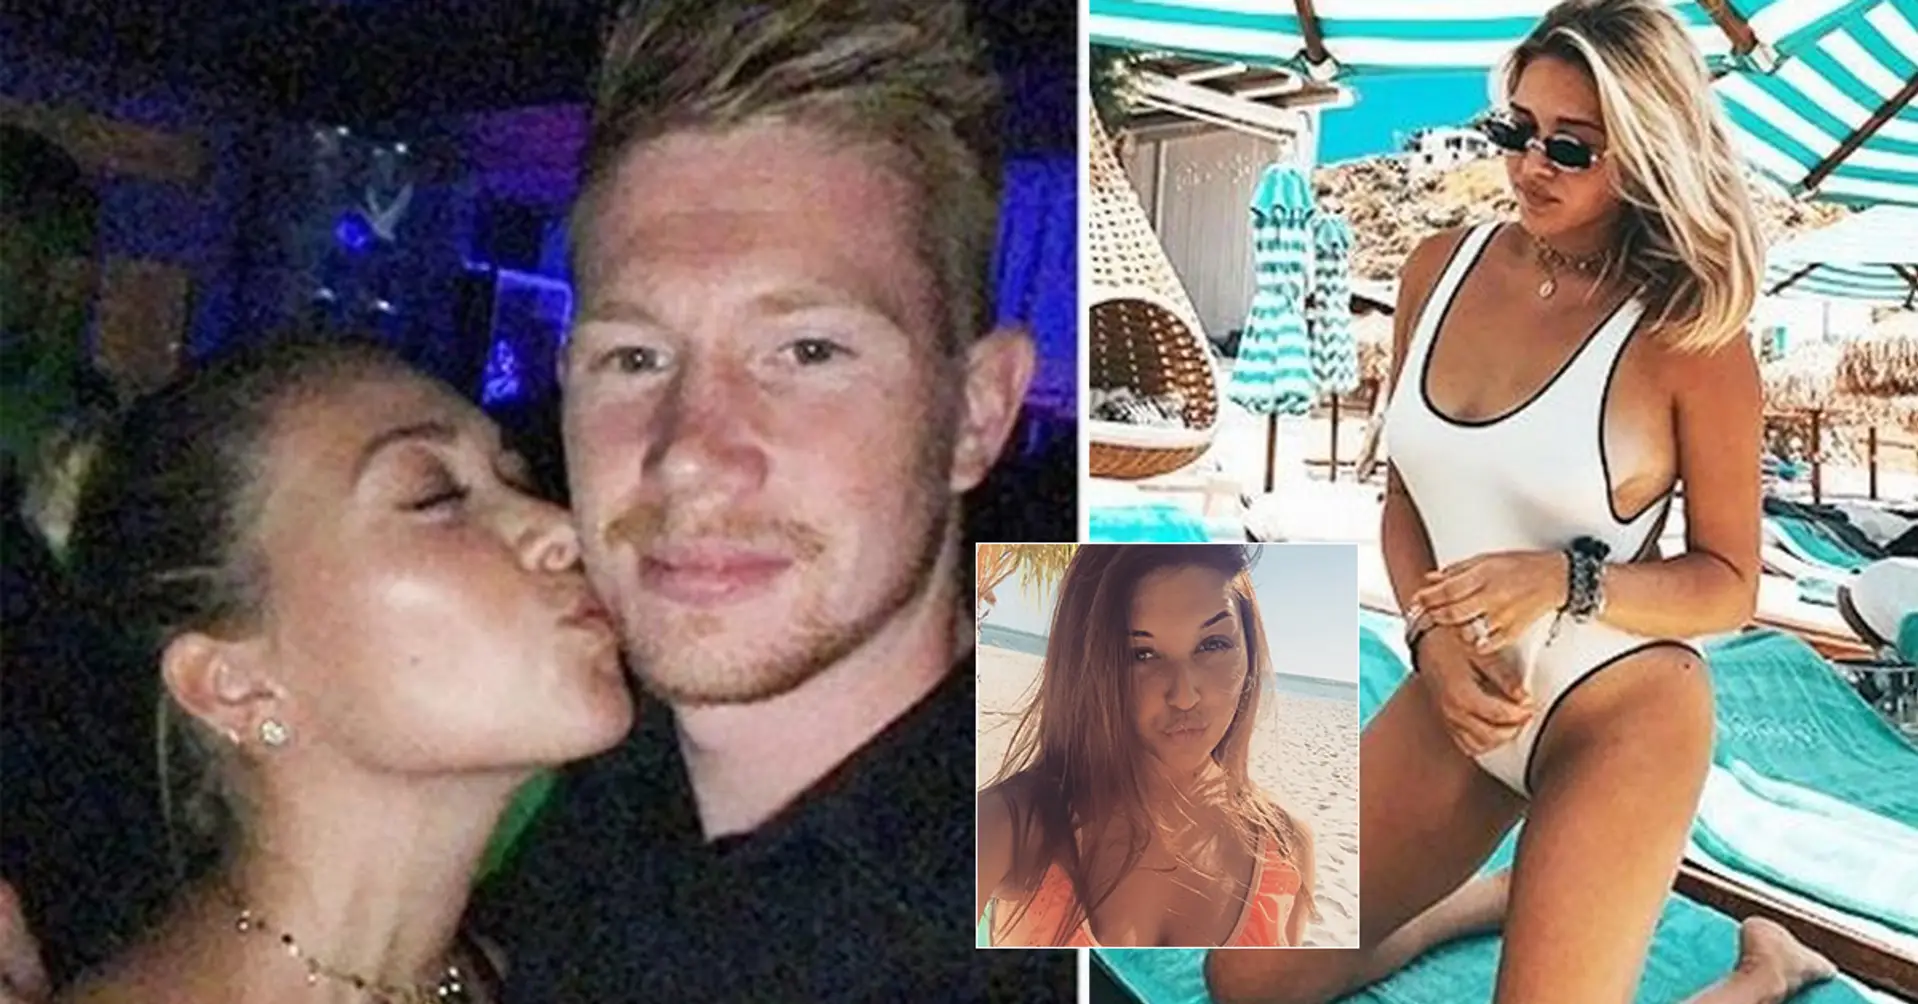 ‘Such an embarrassing story’: Kevin De Bruyne reveals how he started dating his model wife